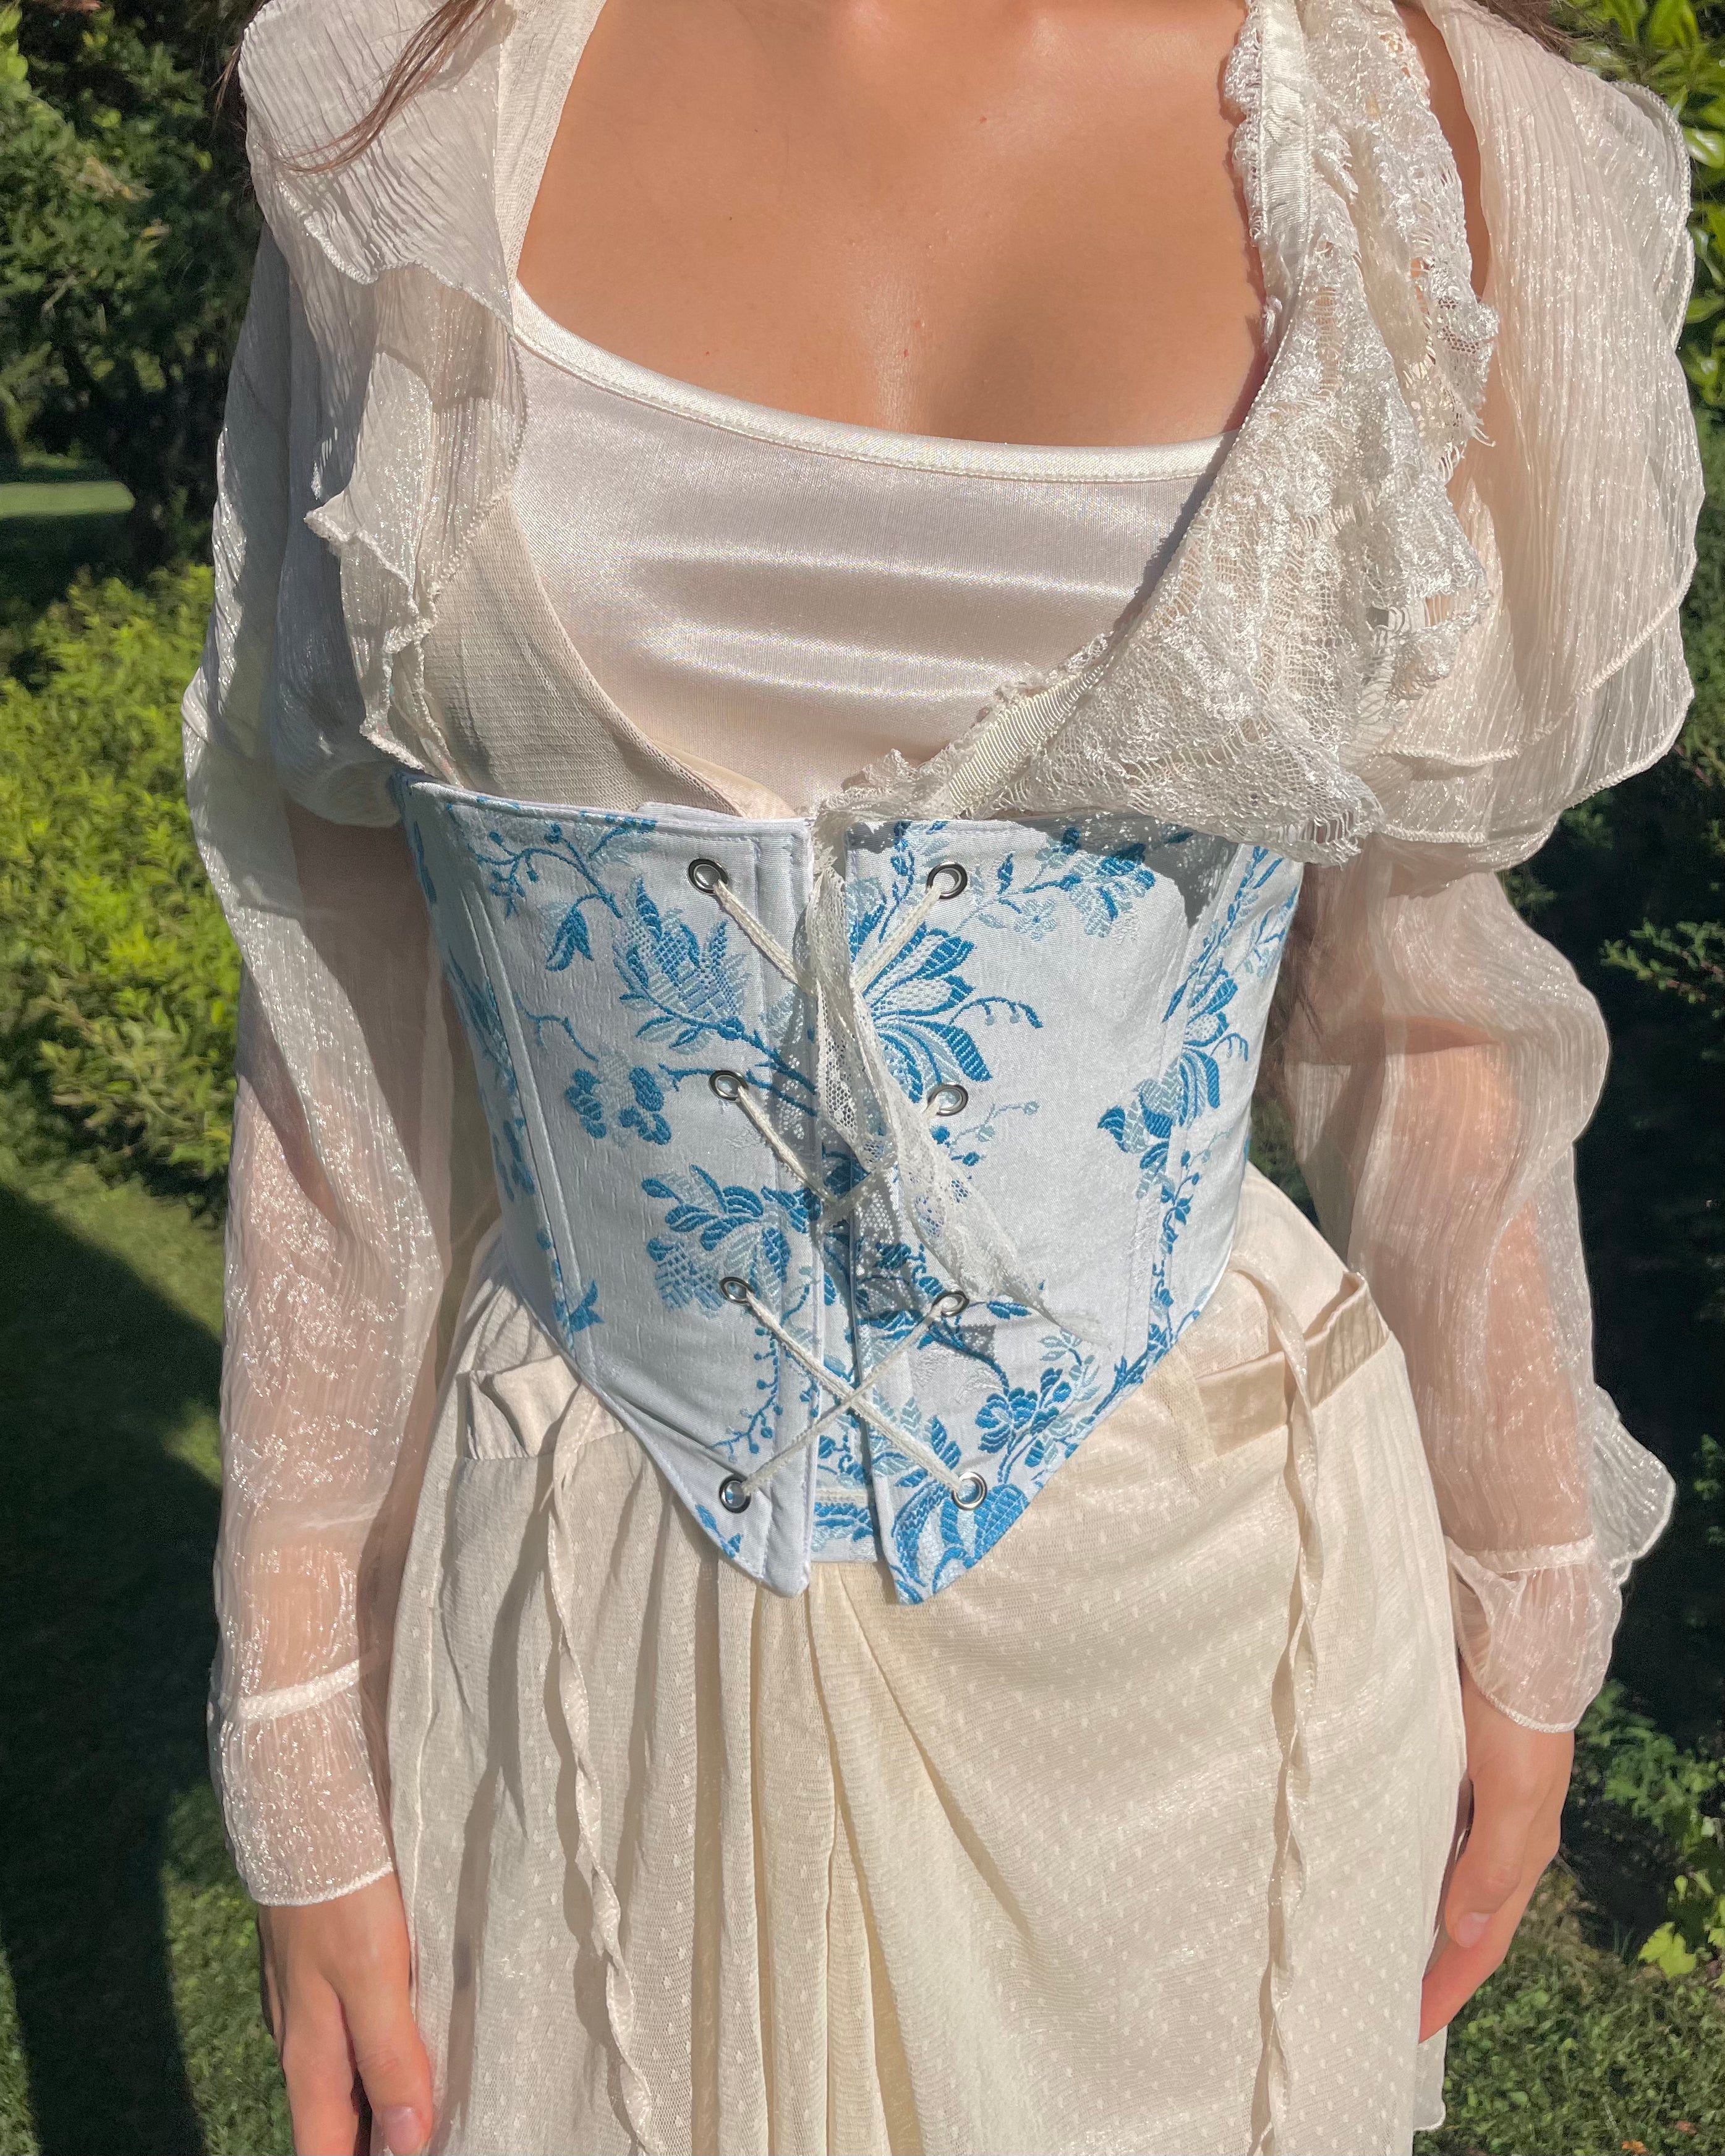 18th Century Stays Marie Antoinette Corset With Front and Back